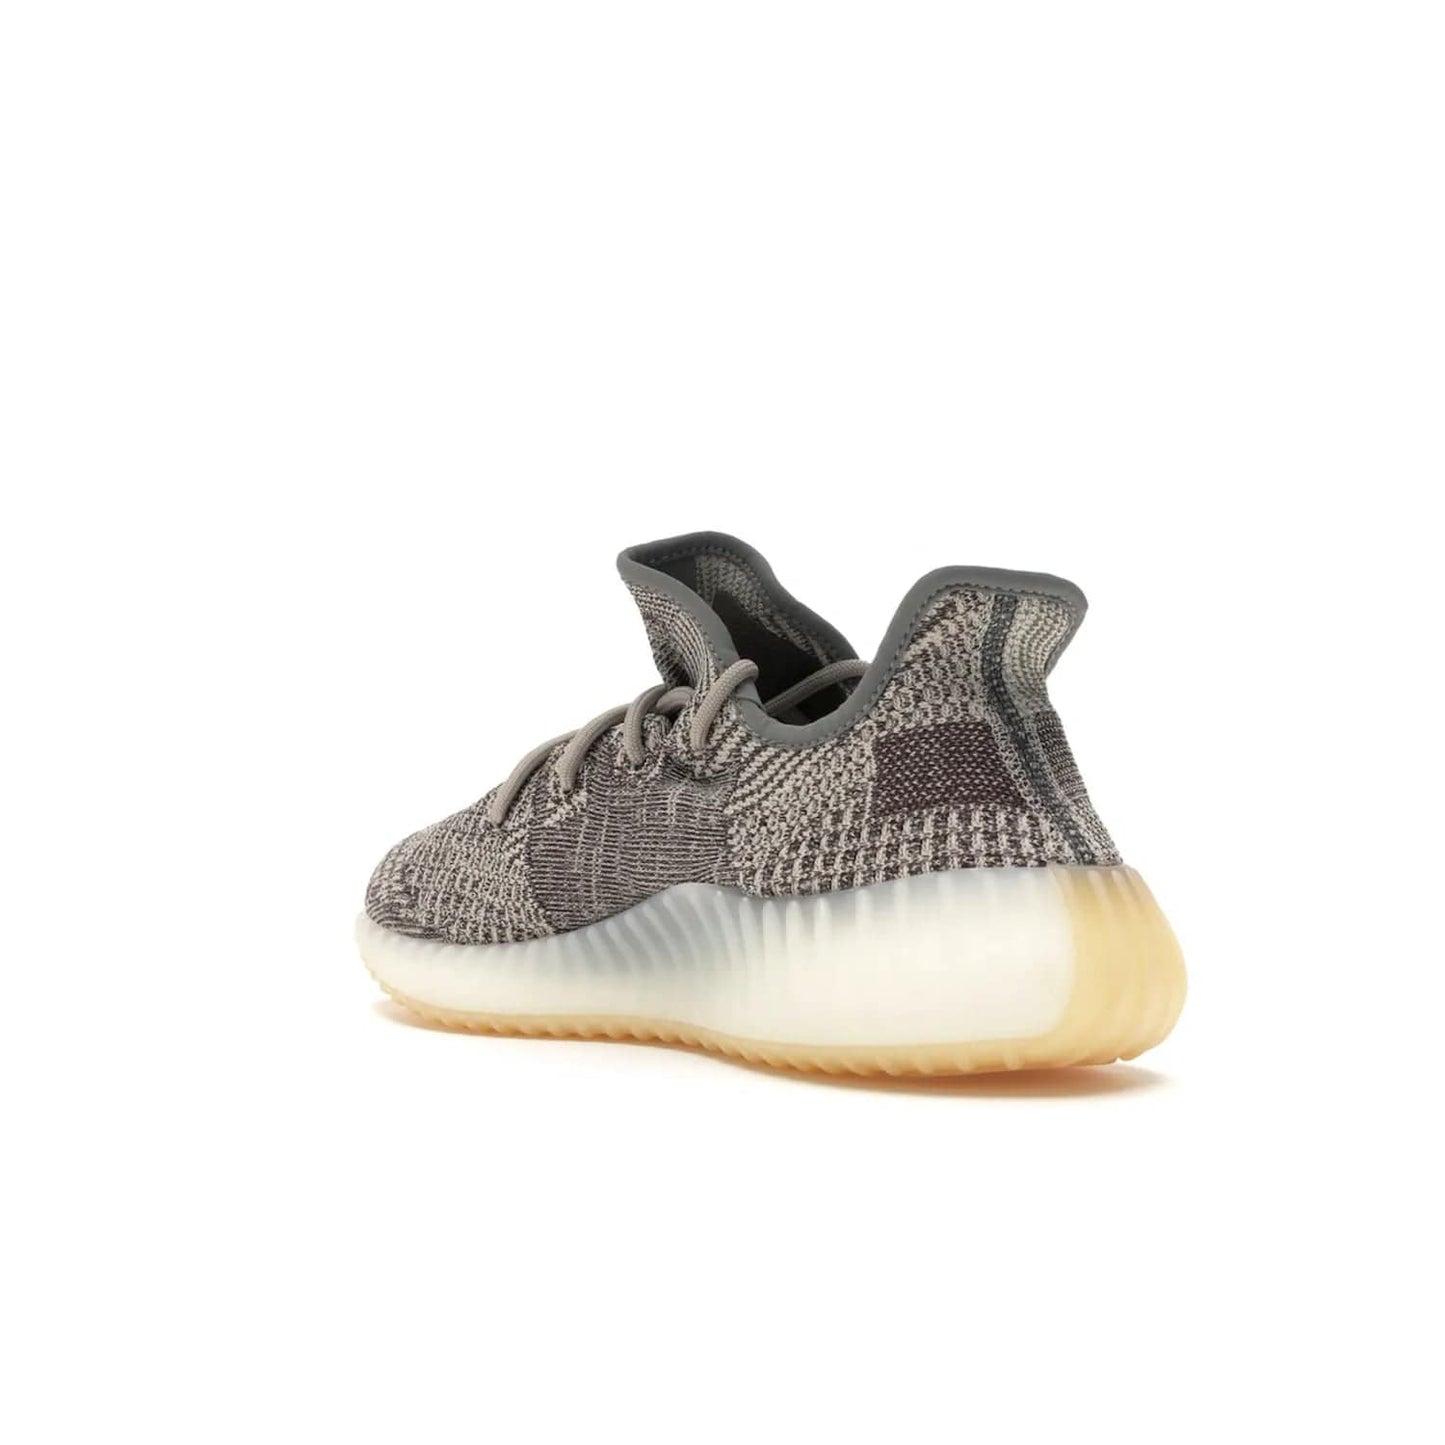 adidas Yeezy Boost 350 V2 Zyon - Image 24 - Only at www.BallersClubKickz.com - Step up your style game with the adidas Yeezy Boost 350 V2 Zyon. This sleek sneaker features a Primeknit upper, dark side stripe, translucent Boost sole, and creamy white interior providing style and comfort. Get them now!